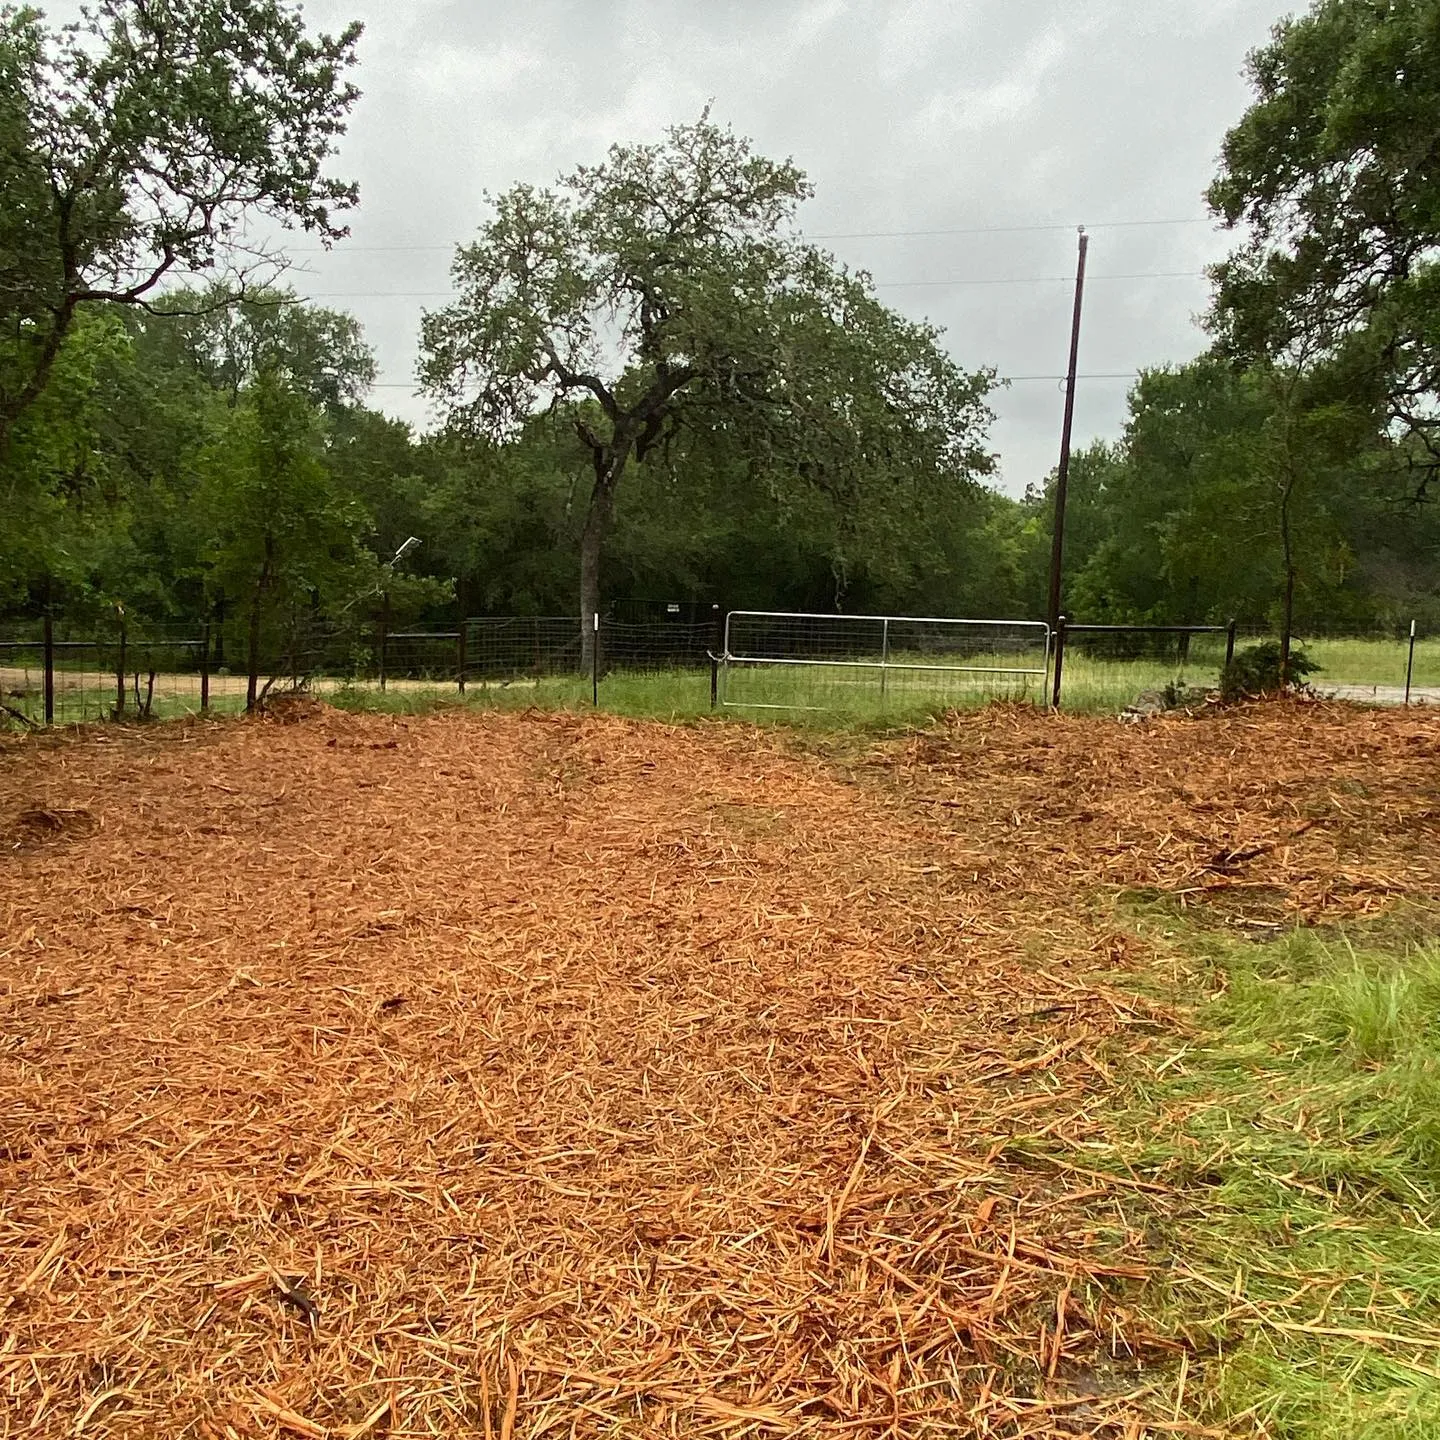 Mulch Installation for New Life Property Service in Hallettsville, Texas